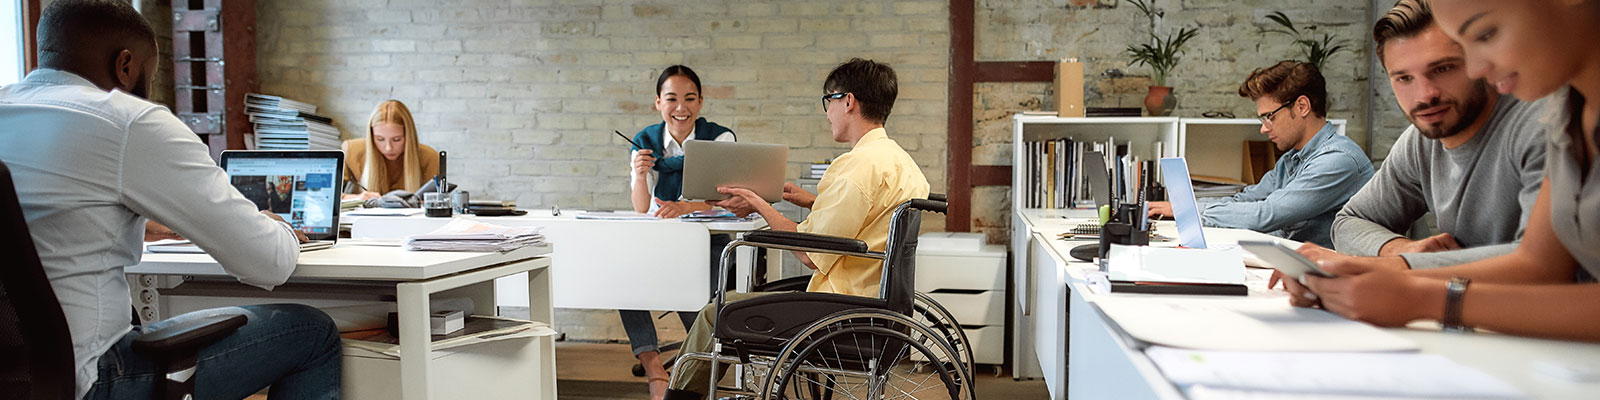 Office workers collaborating, one is in a wheelchair